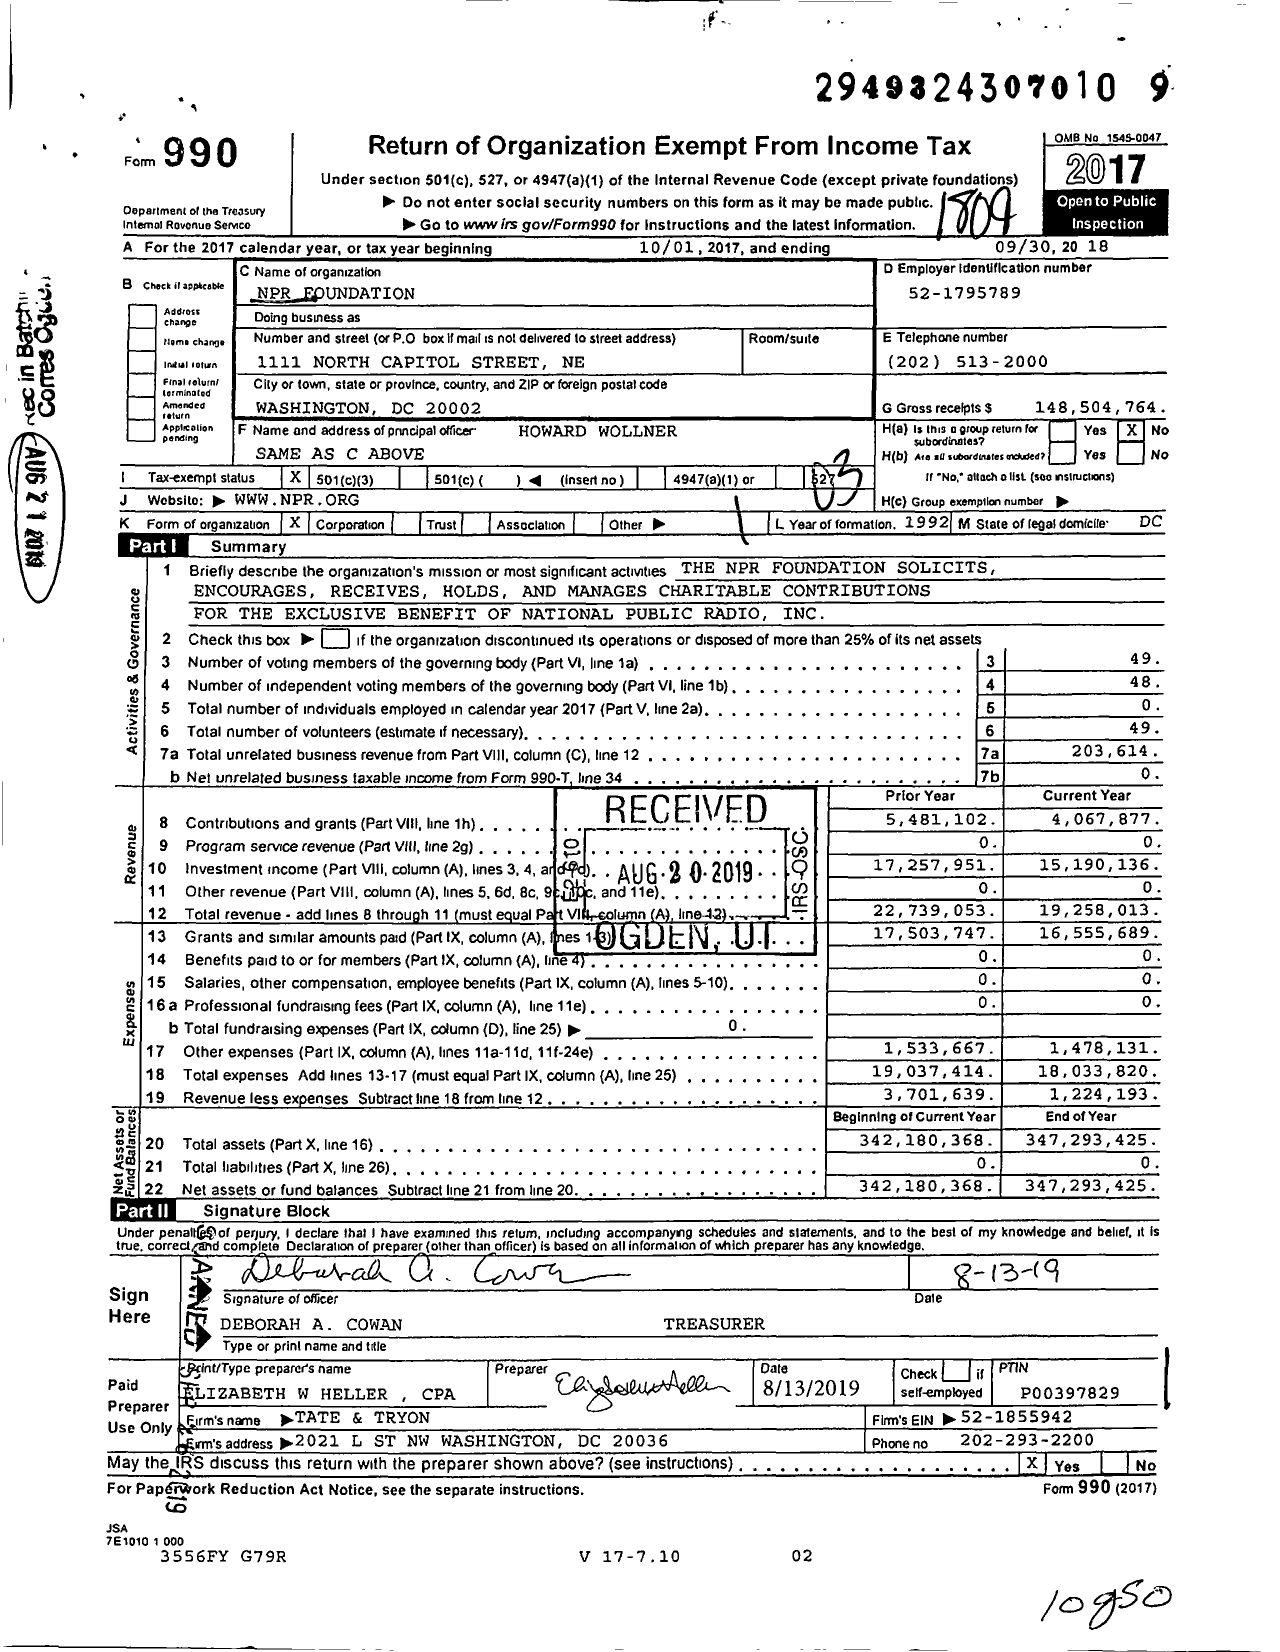 Image of first page of 2017 Form 990 for NPR Foundation